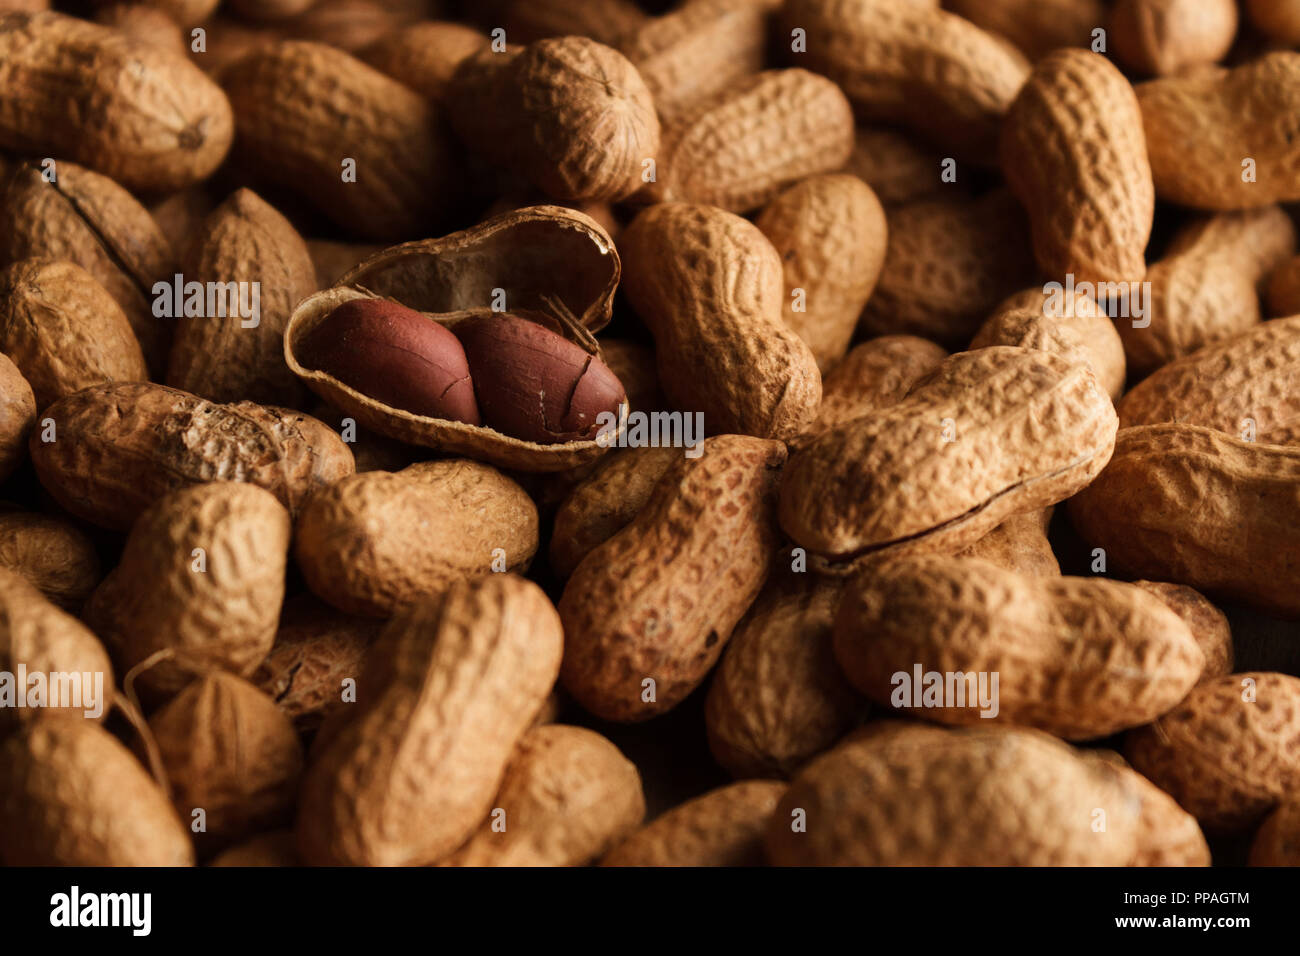 Unpeeled peanuts filling the frame; an opened peanut is the spotlight of the composition. Selective focus. Stock Photo